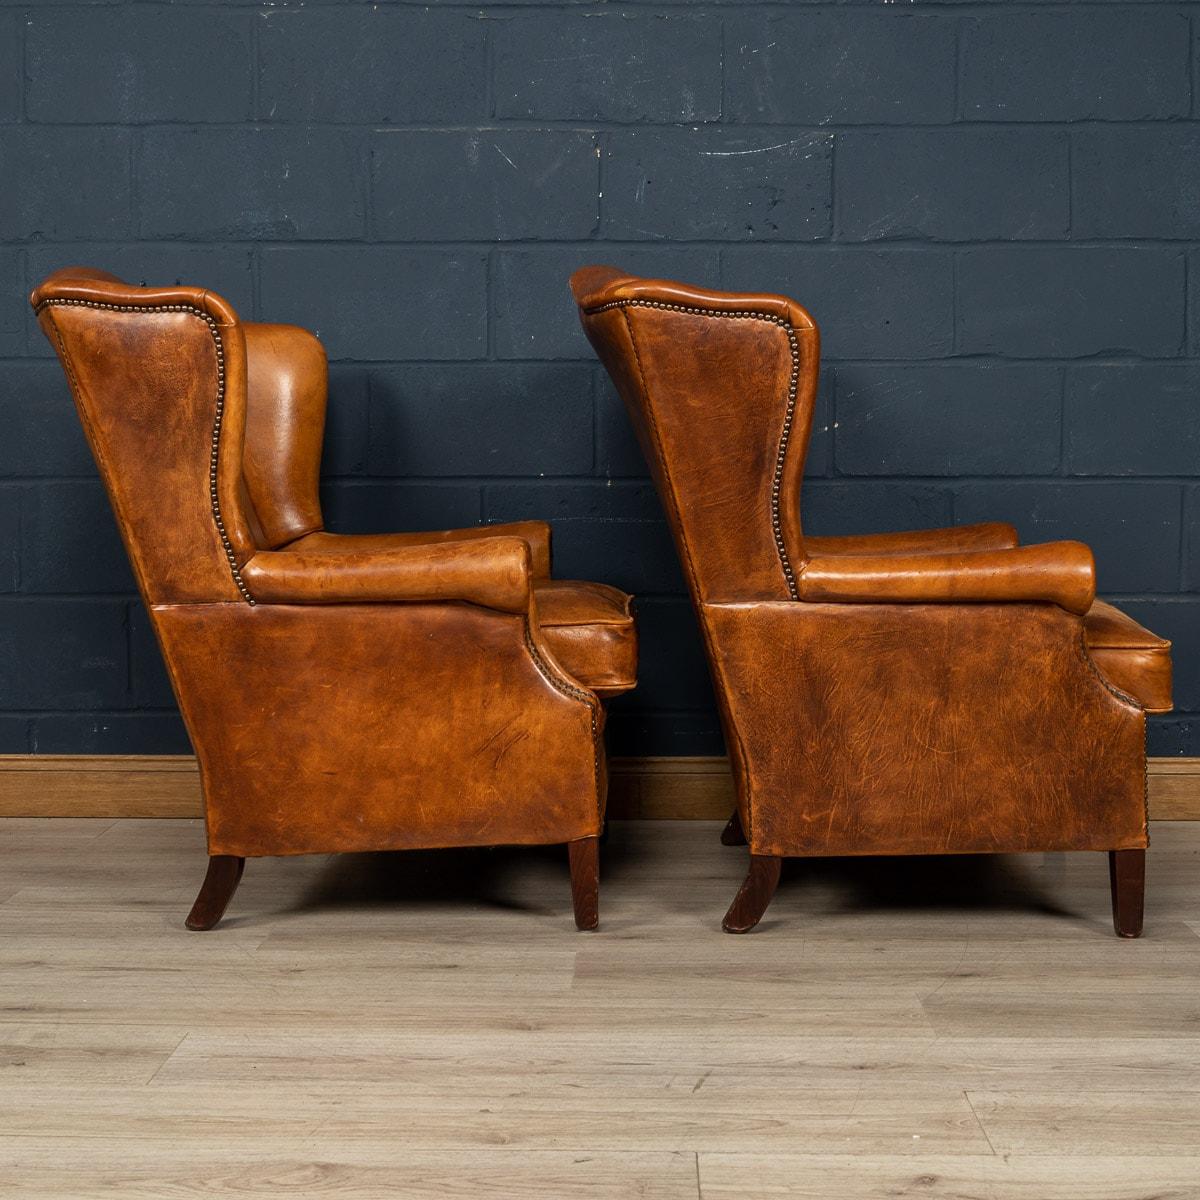 20th Century Dutch Sheepskin Leather Wing-Back Armchairs For Sale 2